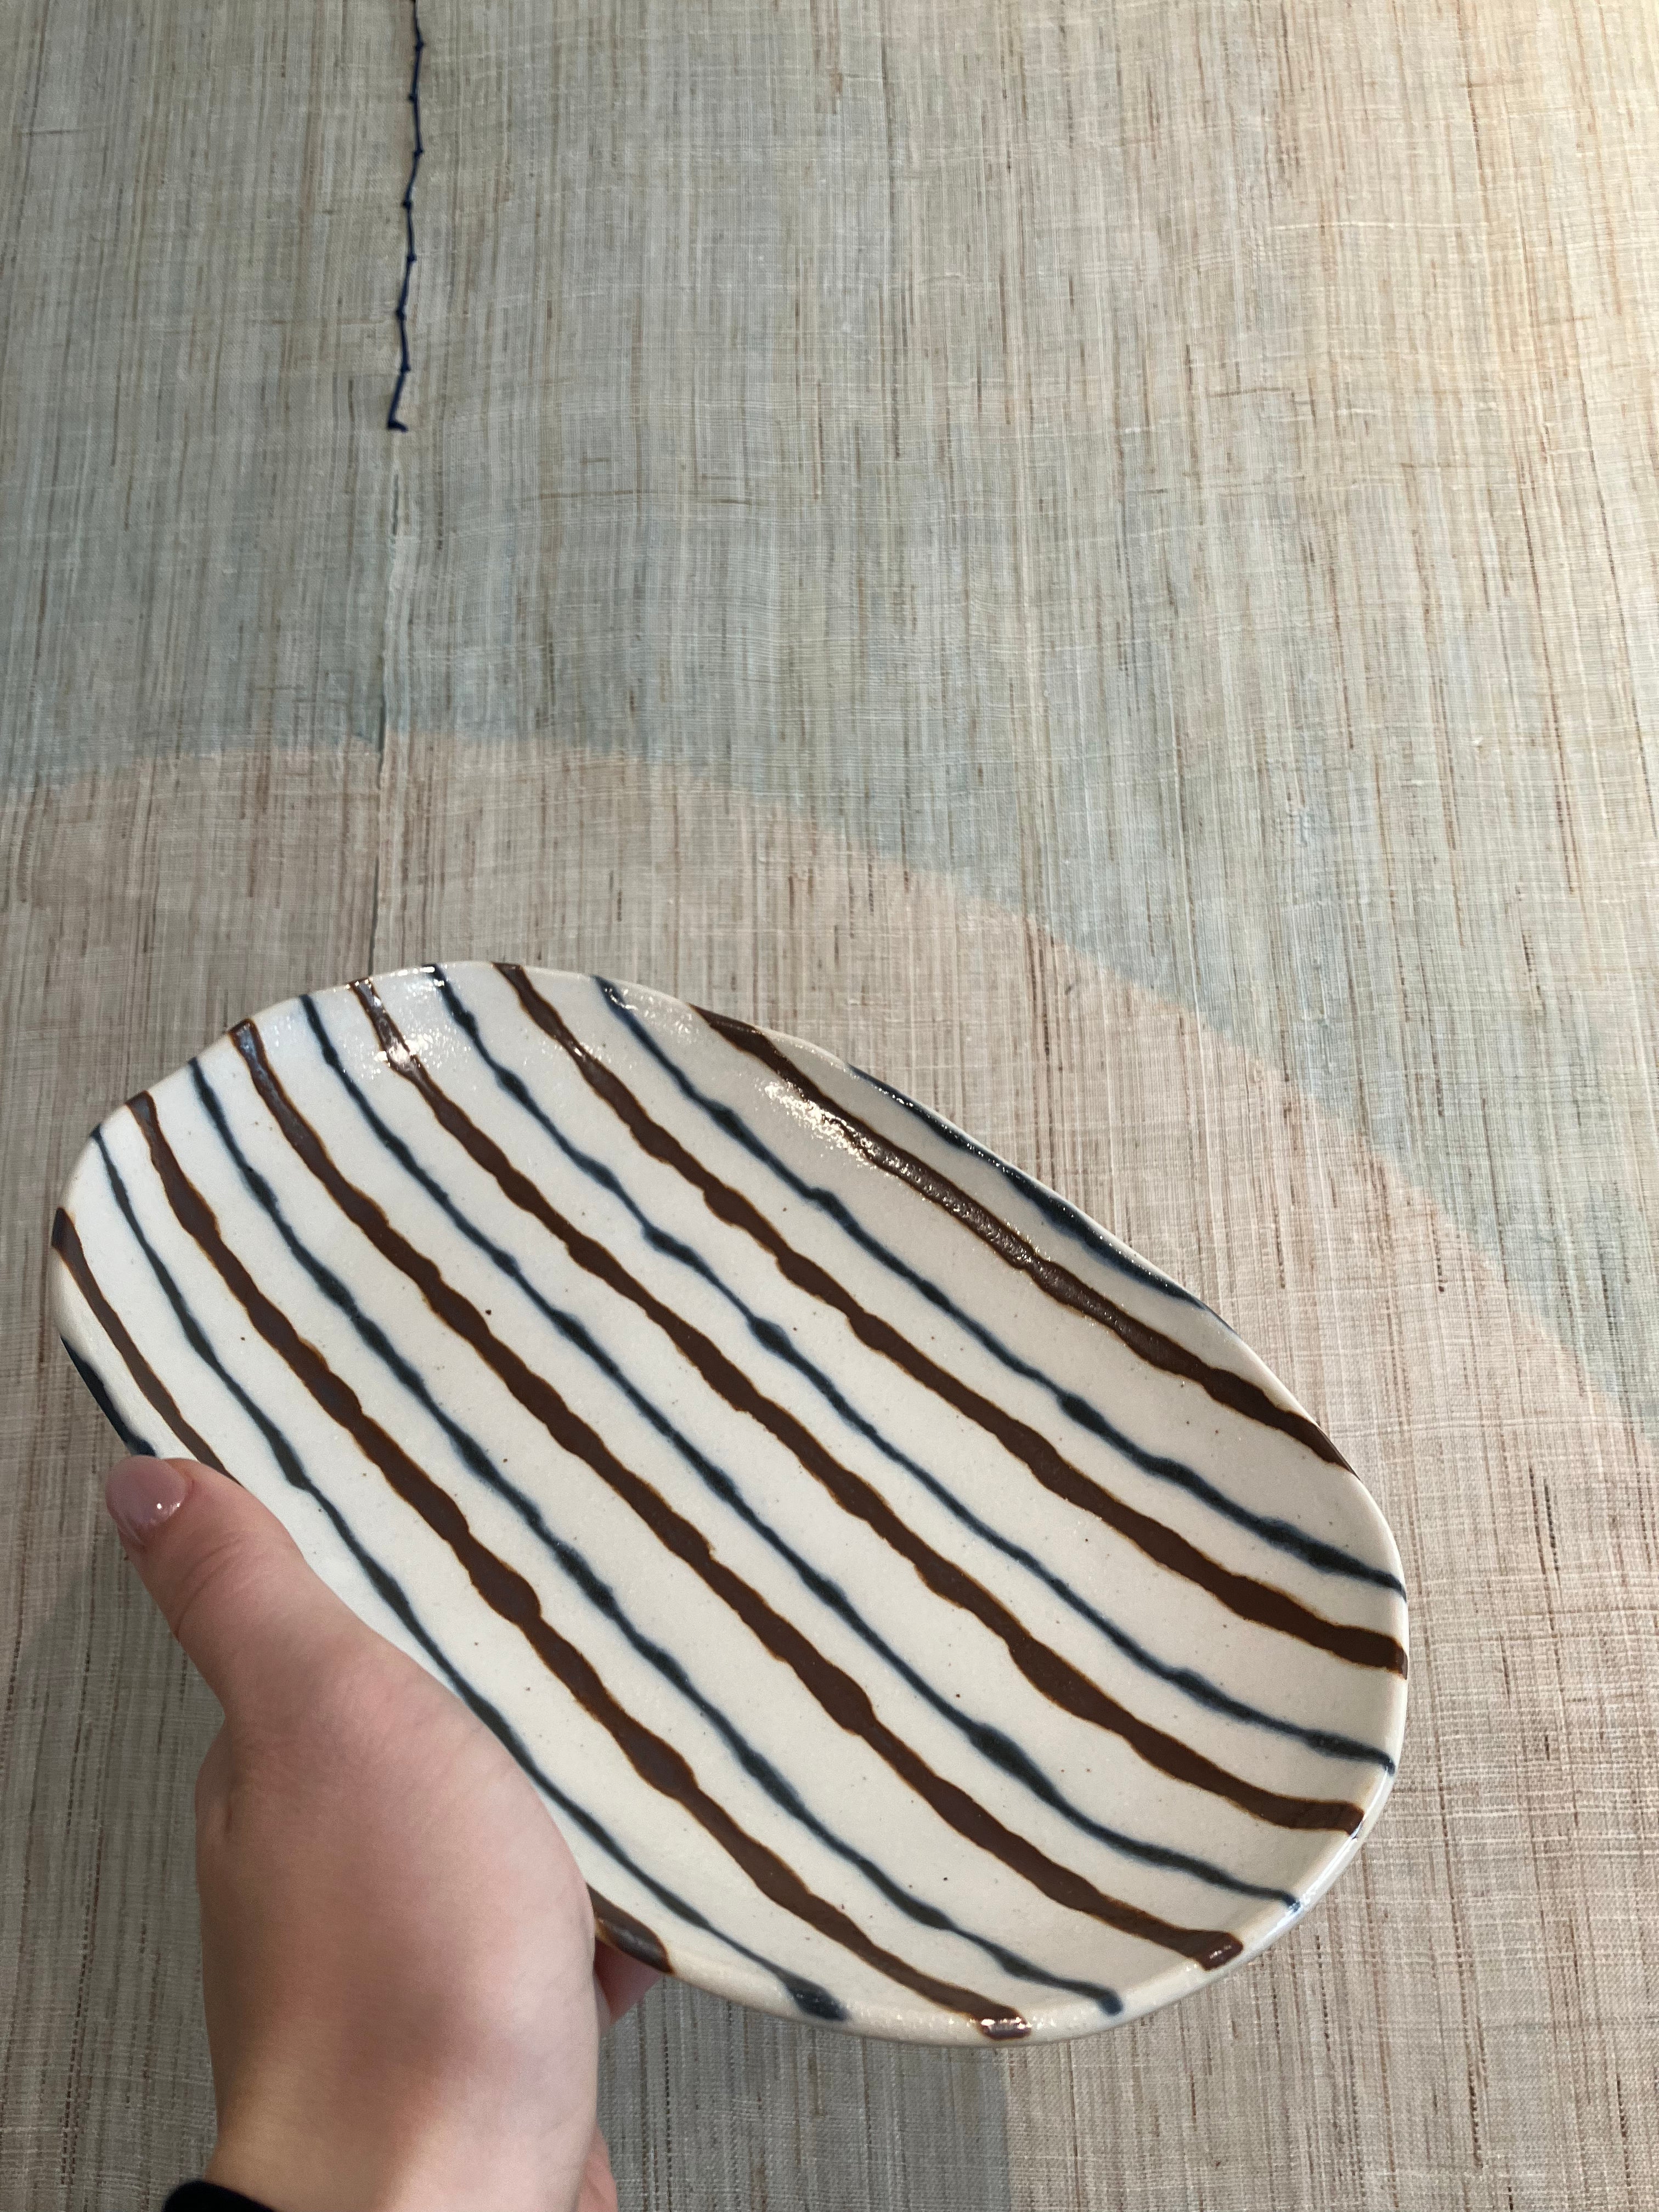 Oval dish with brown and blue stripes